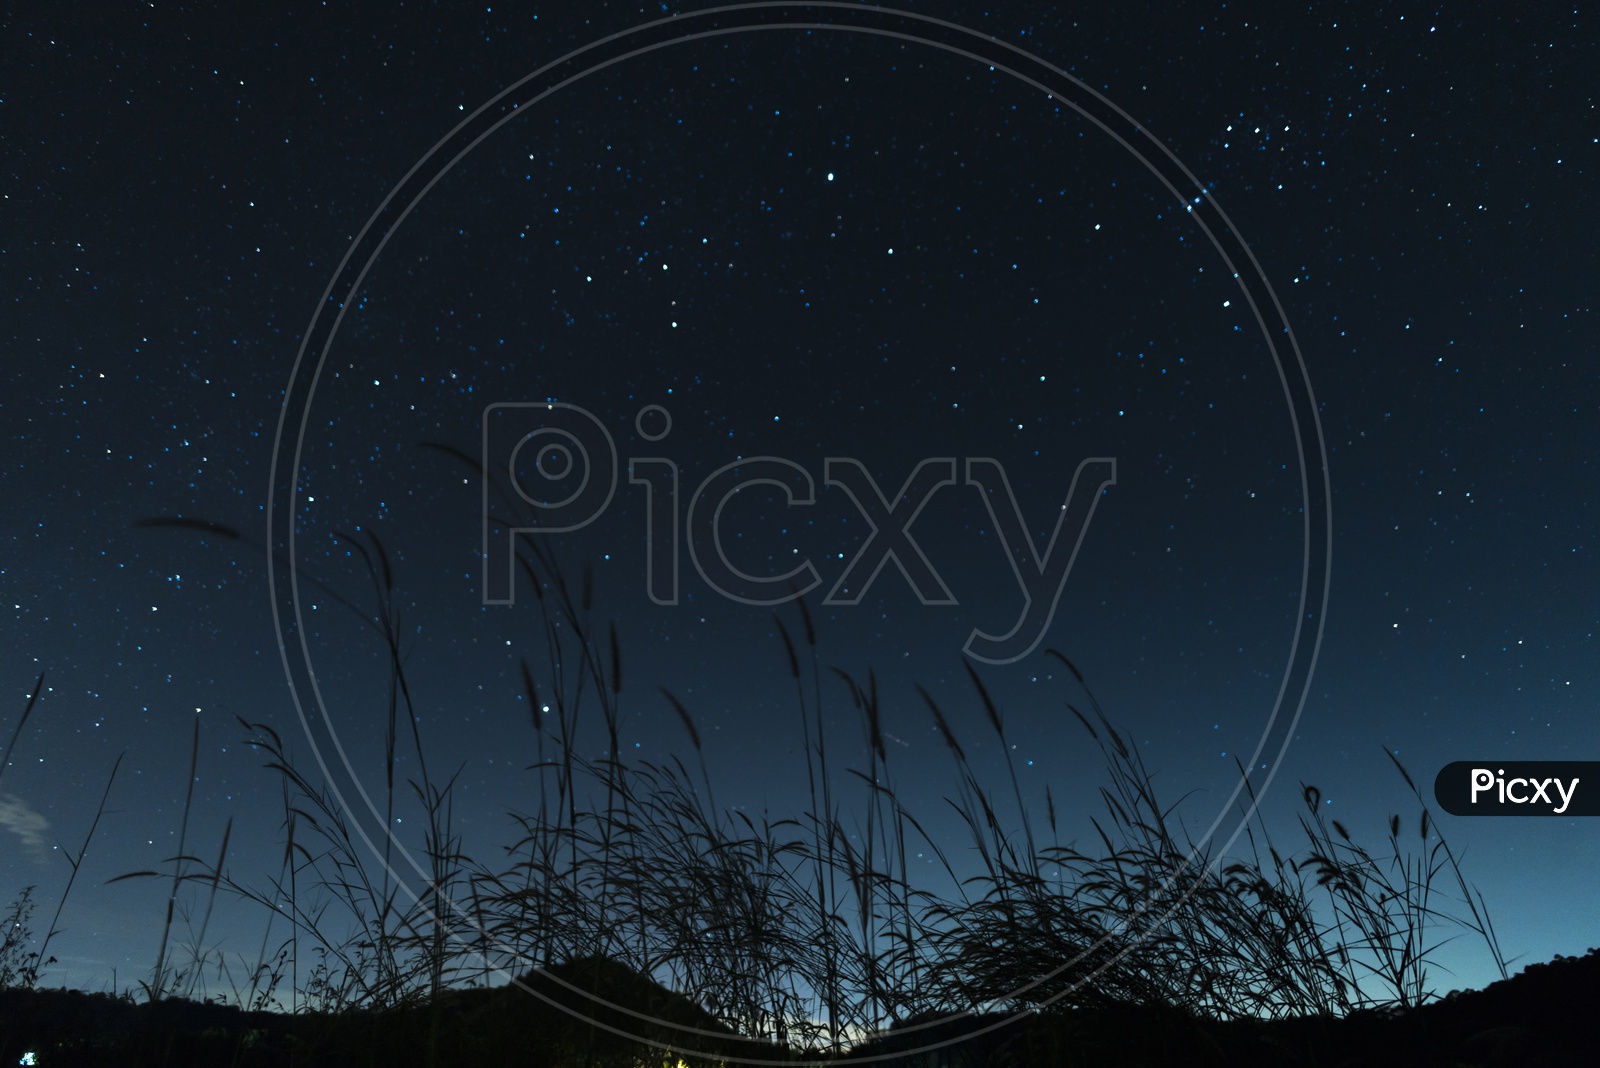 silhouette of grass on night sky background